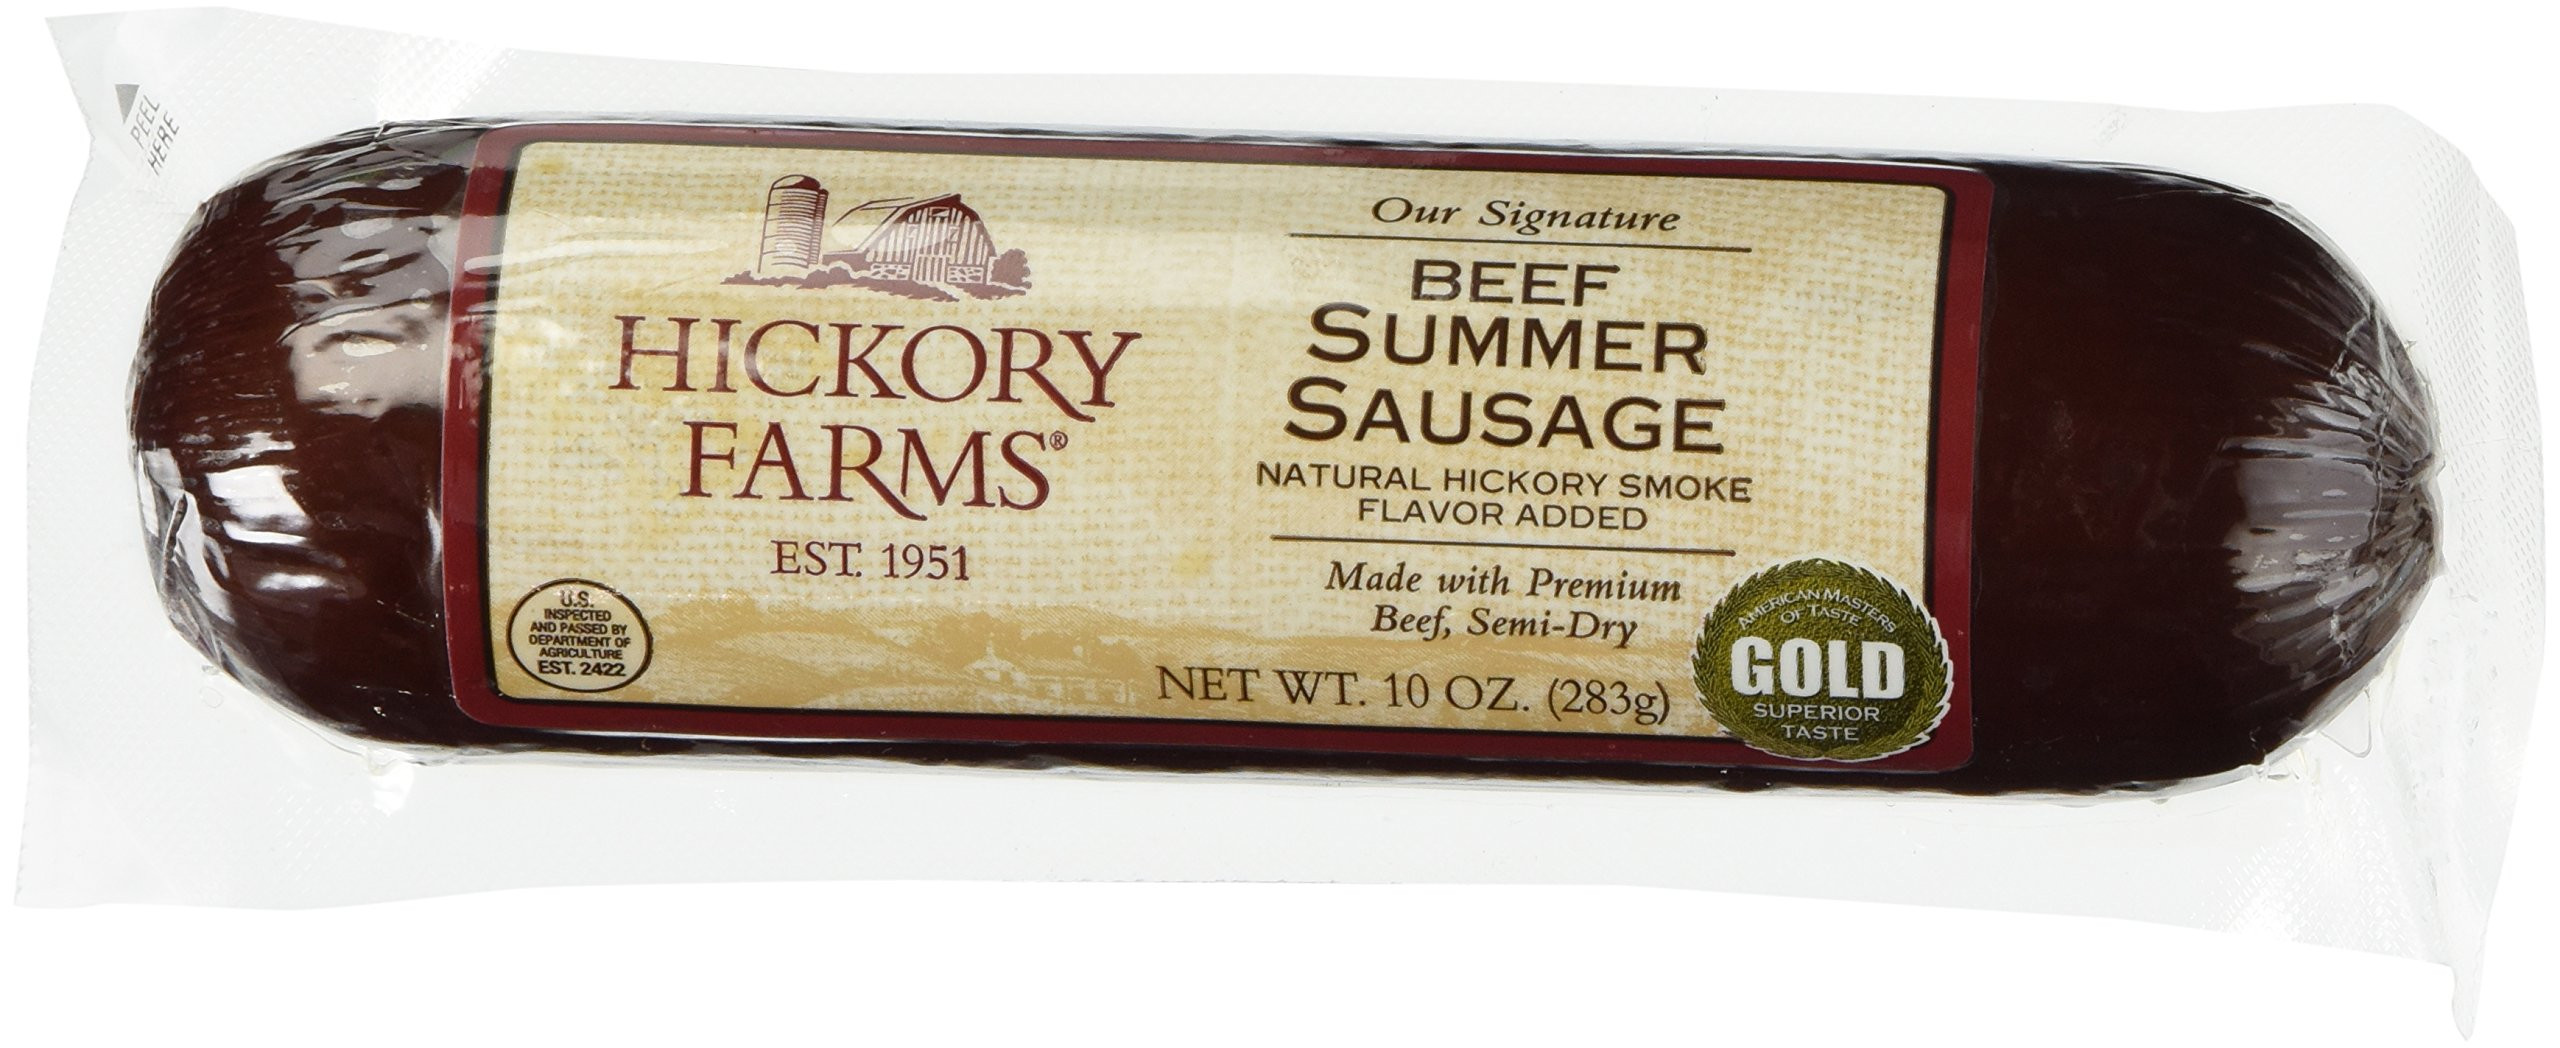 Hickory Farms Beef Summer Sausage
 Hickory Farms Turkey Summer Sausage 10 Ounces Pack of 3